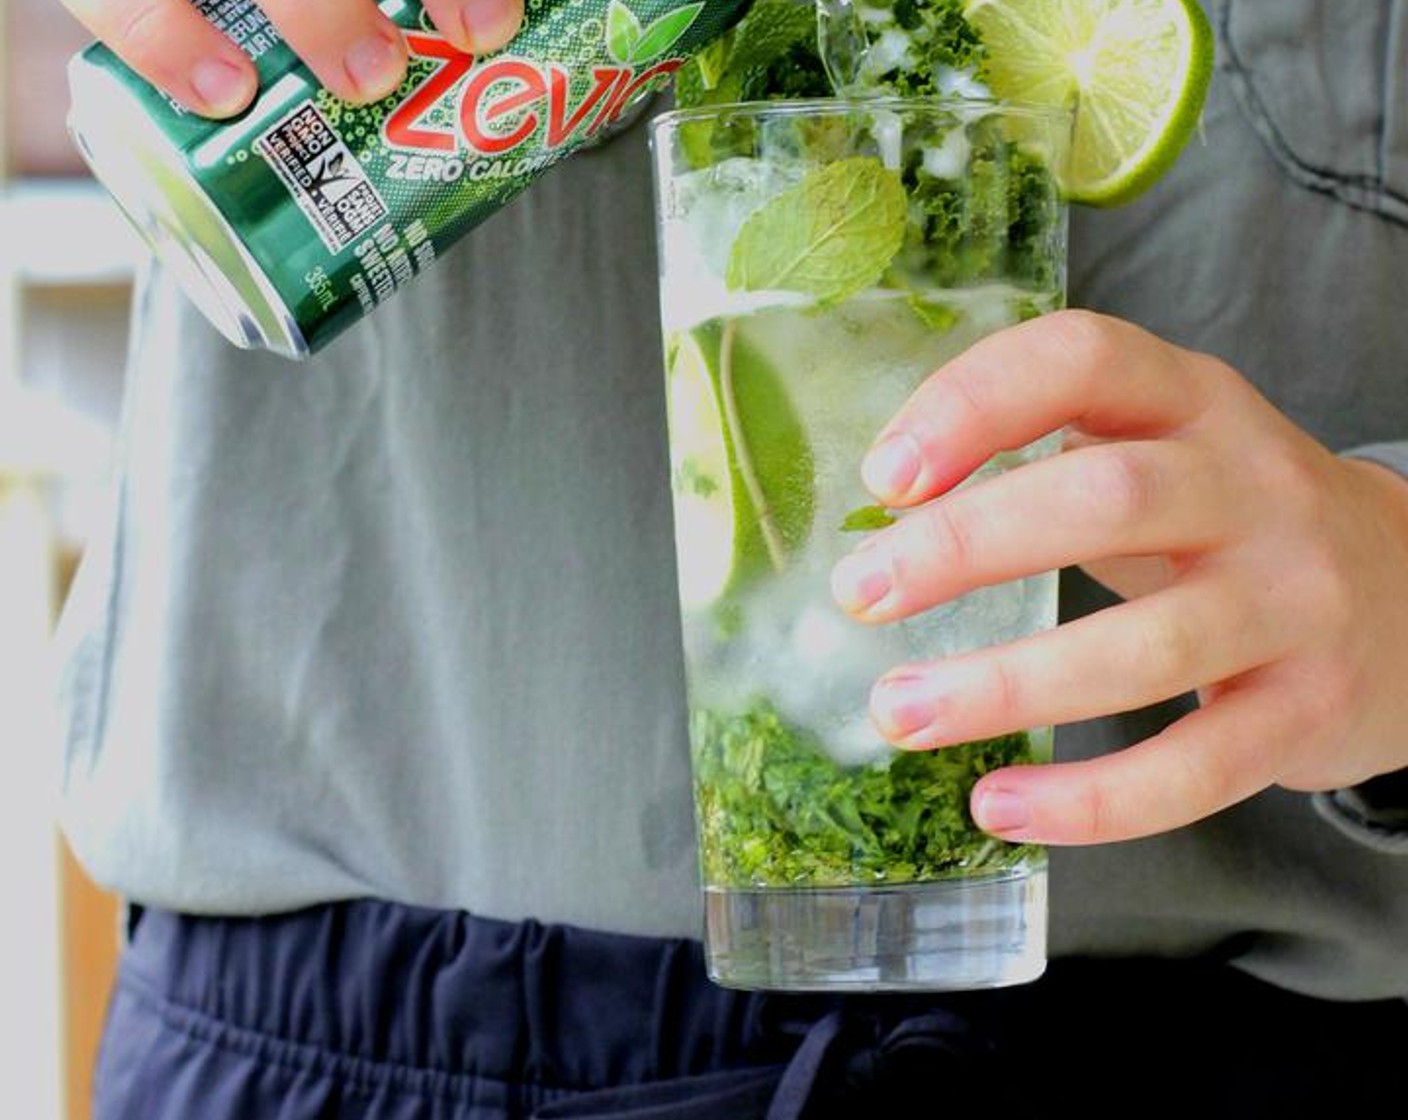 step 3 Fill the rest of the glasses with the Ginger Ale (3/4 can) and Tonic Water (1/2 can) evenly distributed between both glasses. Then top with Limes (to taste), more Kale (to taste), and Fresh Mint (to taste) to decorate and WOW your guests!